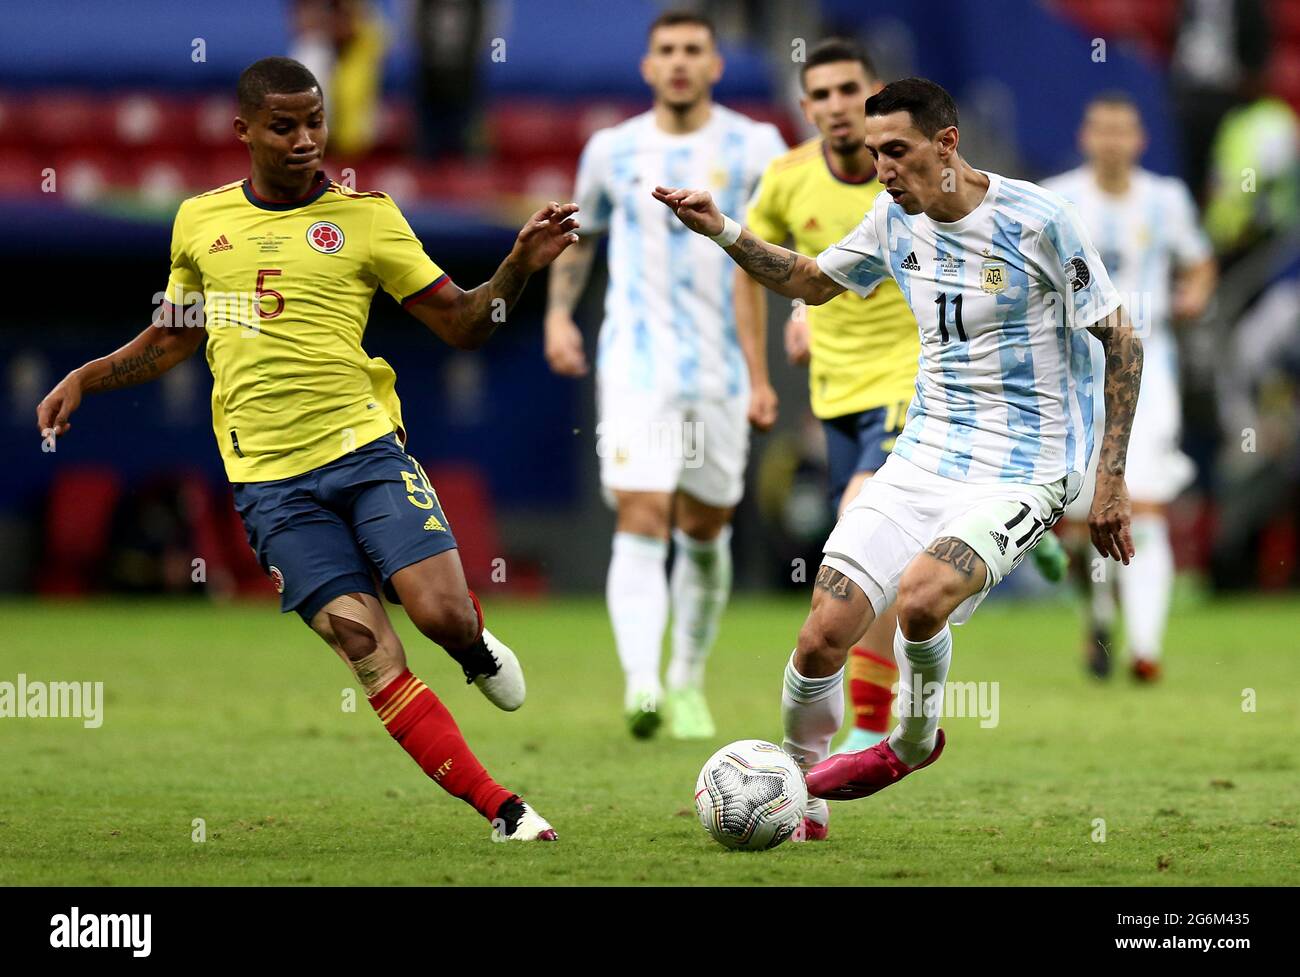 BRASILIA, BRAZIL - JULY 06: Angel Di Maria of Argentina competes for the ball with Wilmar Barrios of Colombia ,during the Semifinal match between Argentina and Colombia as part of Conmebol Copa America Brazil 2021 at Mane Garrincha Stadium on July 6, 2021 in Brasilia, Brazil. (MB Media) Stock Photo